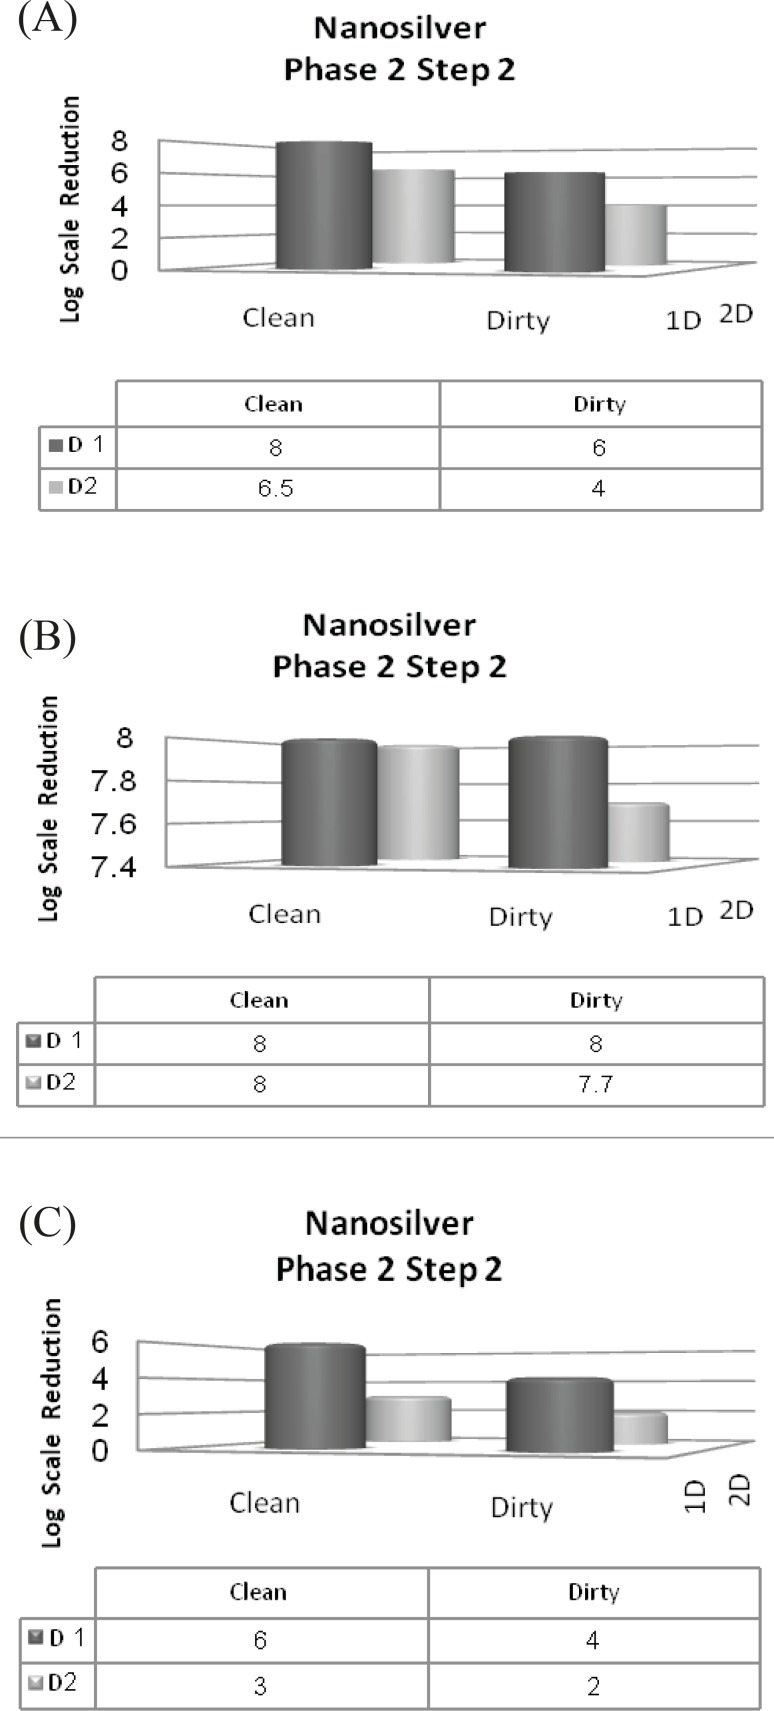 Reduction in the 108 inoculum of the three standard strains after exposure to the two dilutions of nanosilver in clean and dirty conditions (phase 2, step 2) (A) Pseudomonas aeruginosa; (B) Escherichia coli; (C) Staphylococcus aureus